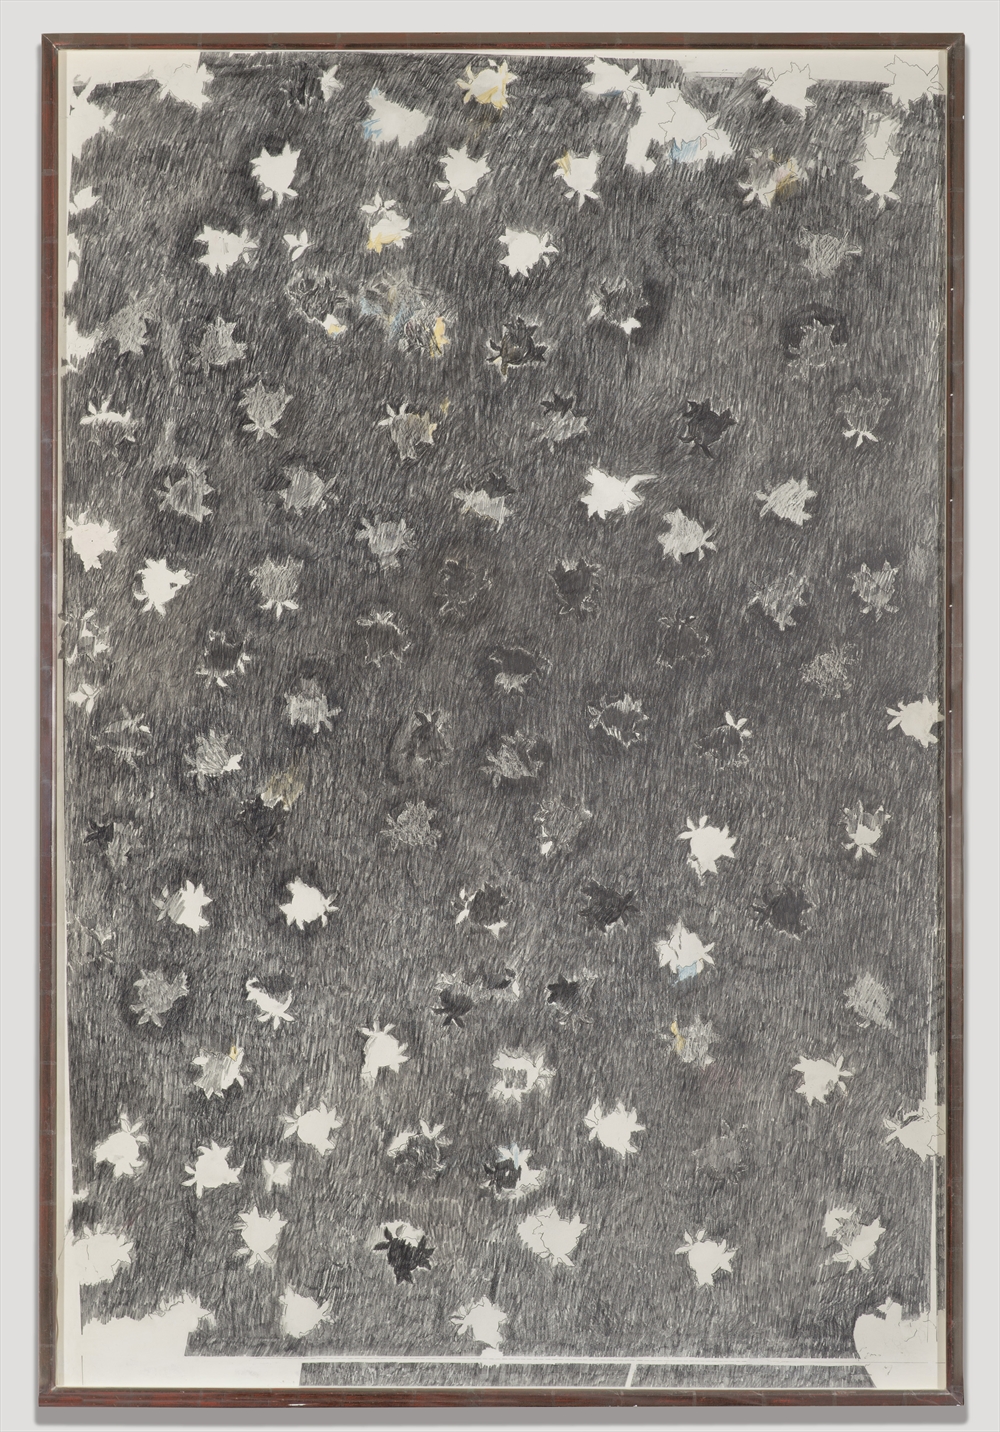 Archisearch - Ed Moses, Rose #5, 1963, Collection of Jena and Michael King, (c) 2015 Ed Moses, photo (c) 2015 Museum Associates/LACMA, by Brian Forrest